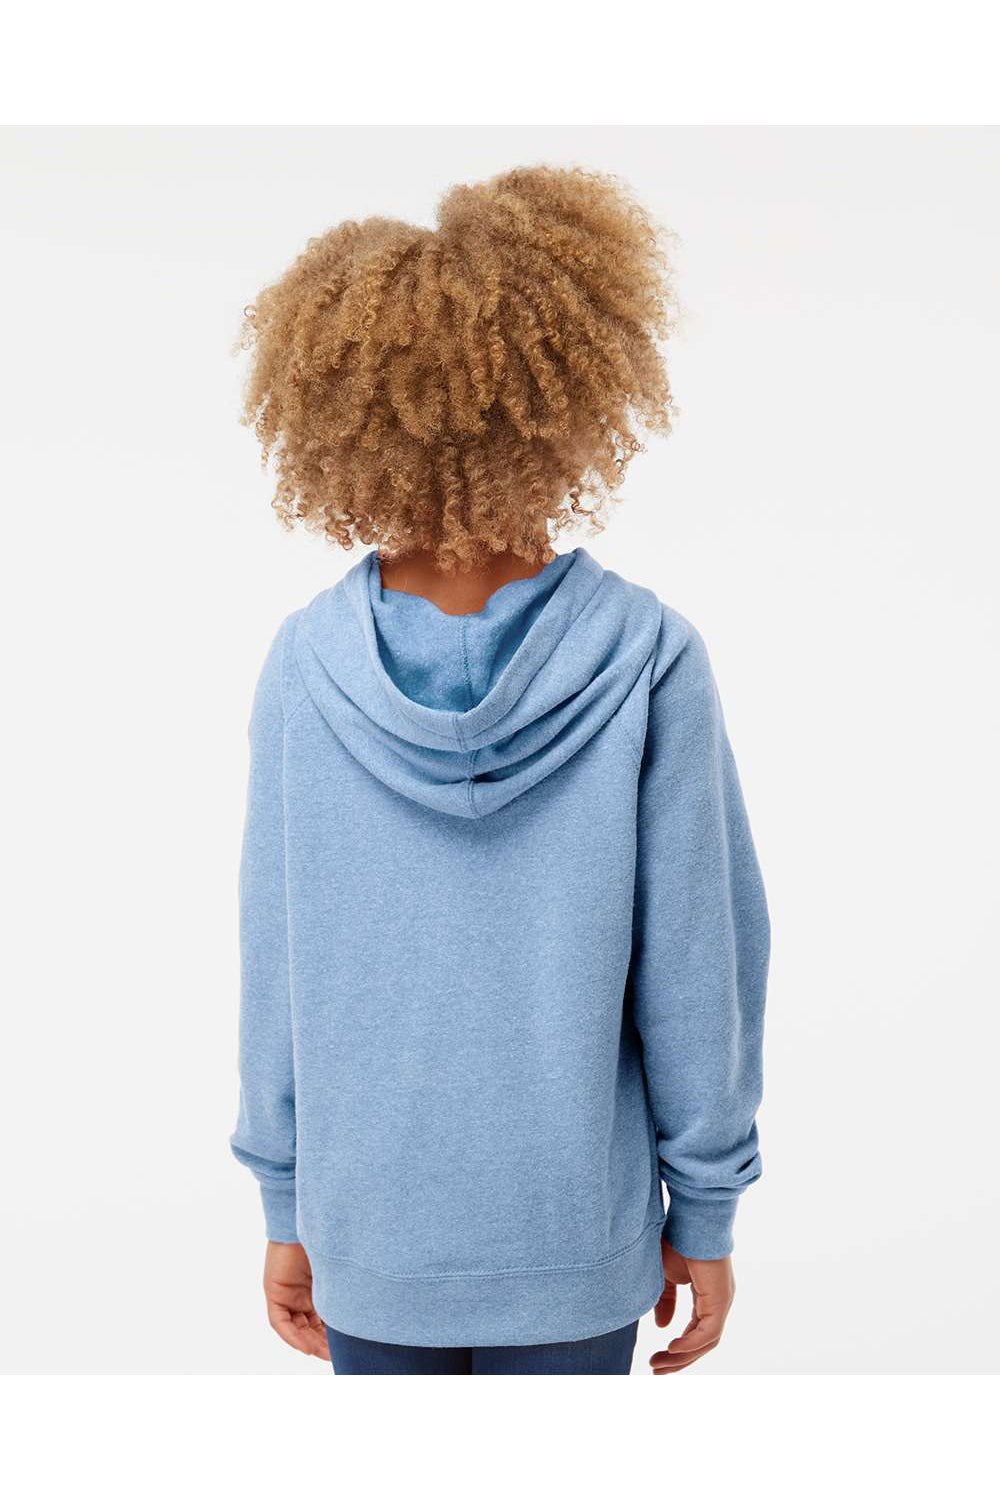 Independent Trading Co. PRM15YSB Youth Special Blend Raglan Hooded Sweatshirt Hoodie Pacific Blue Model Back